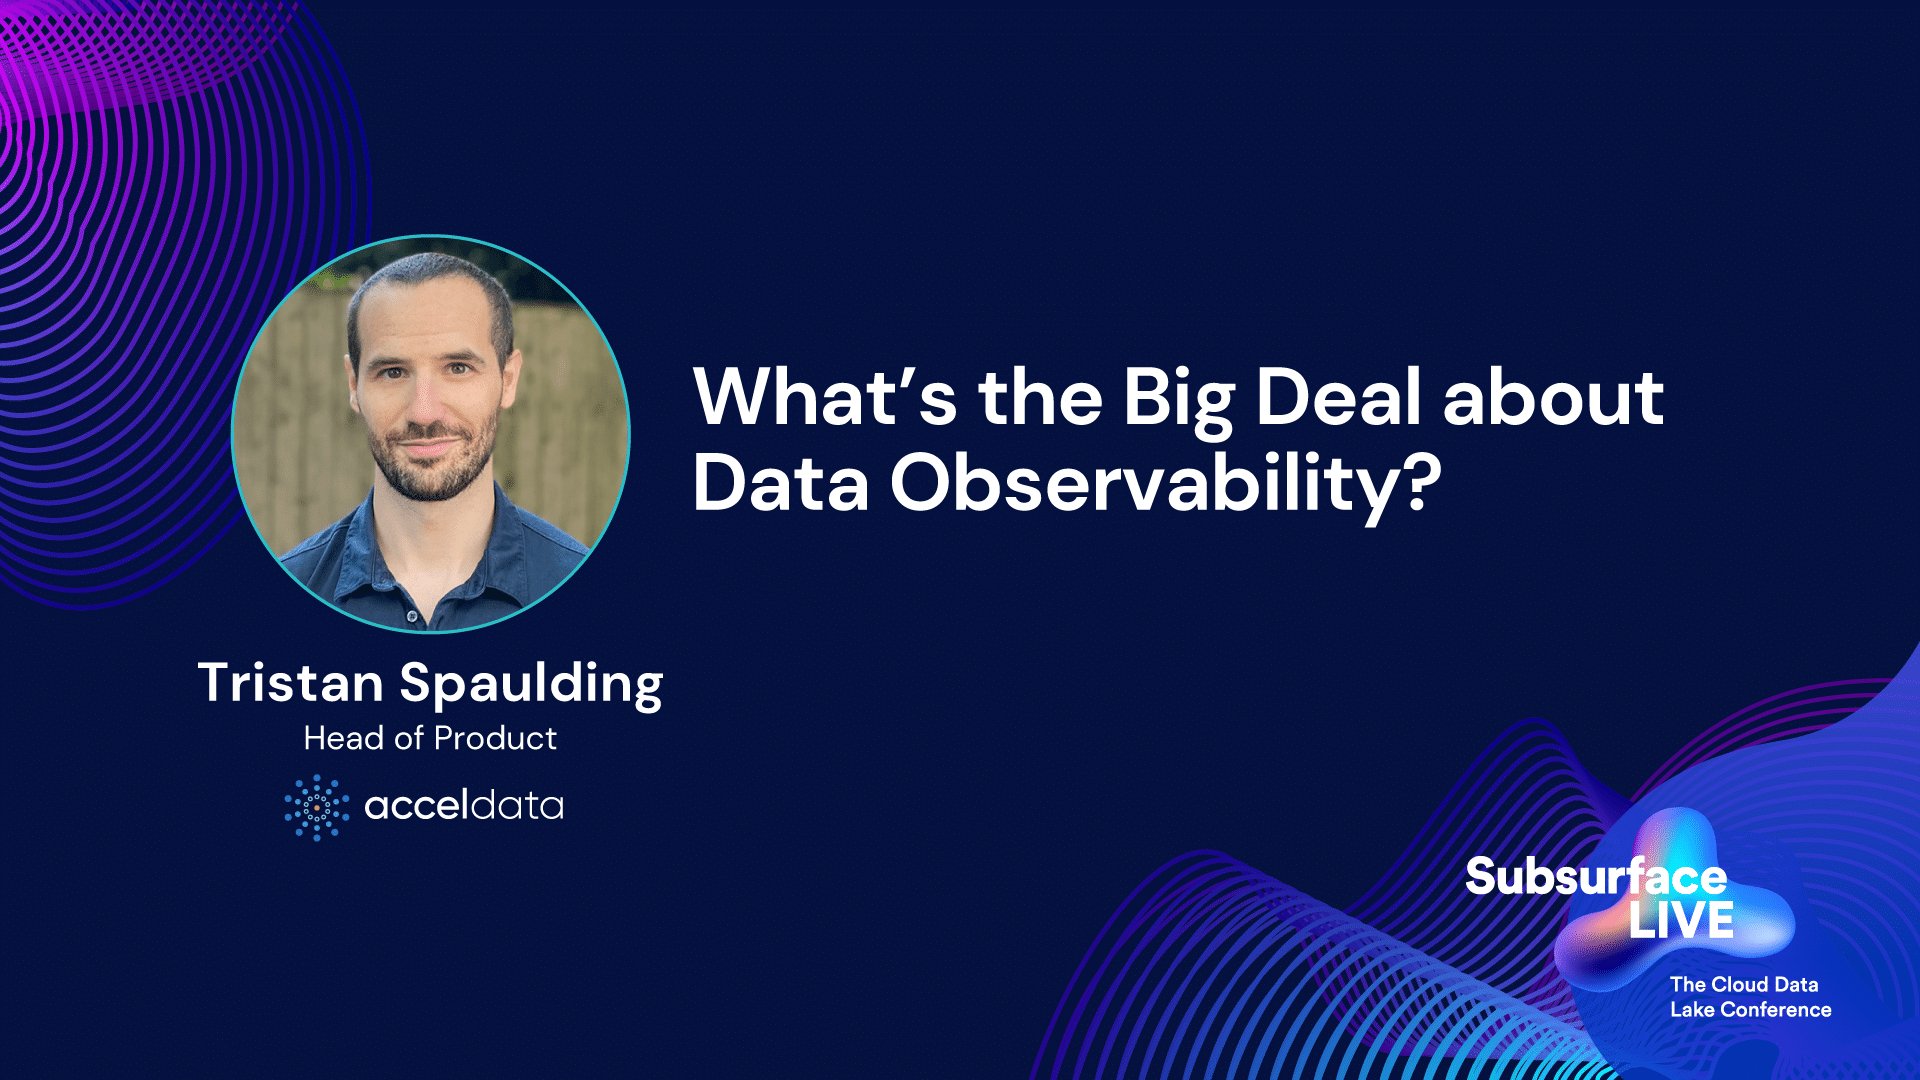 What’s the Big Deal about Data Observability